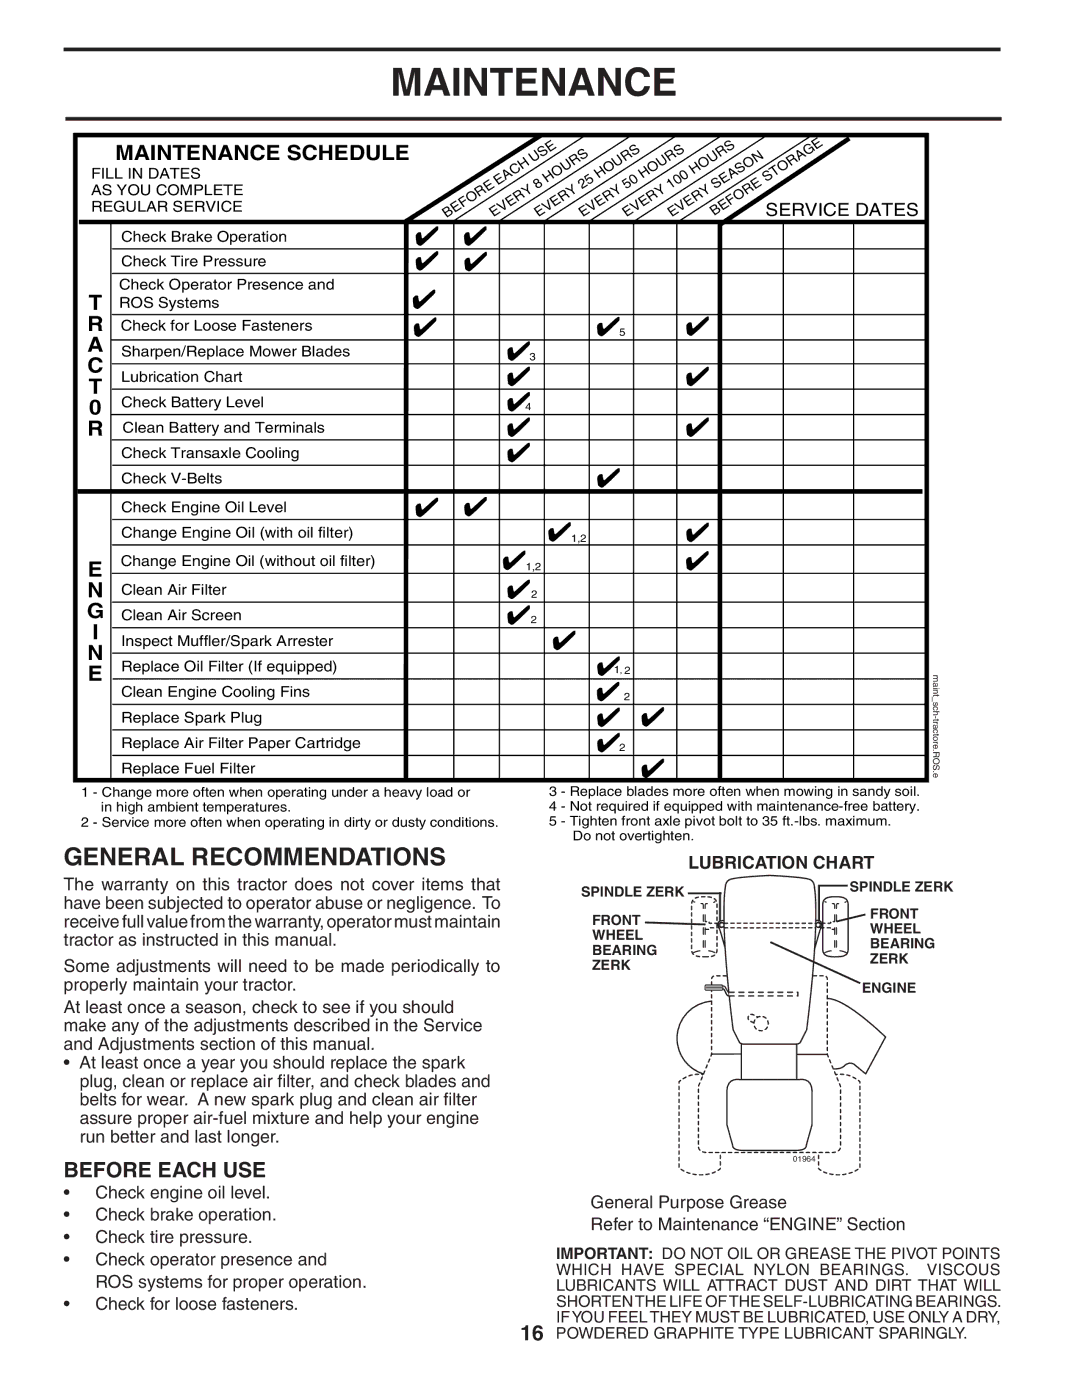 Husqvarna YTH2448 manual General Recommendations, Maintenance Schedule, Before Each USE, Lubrication Chart 